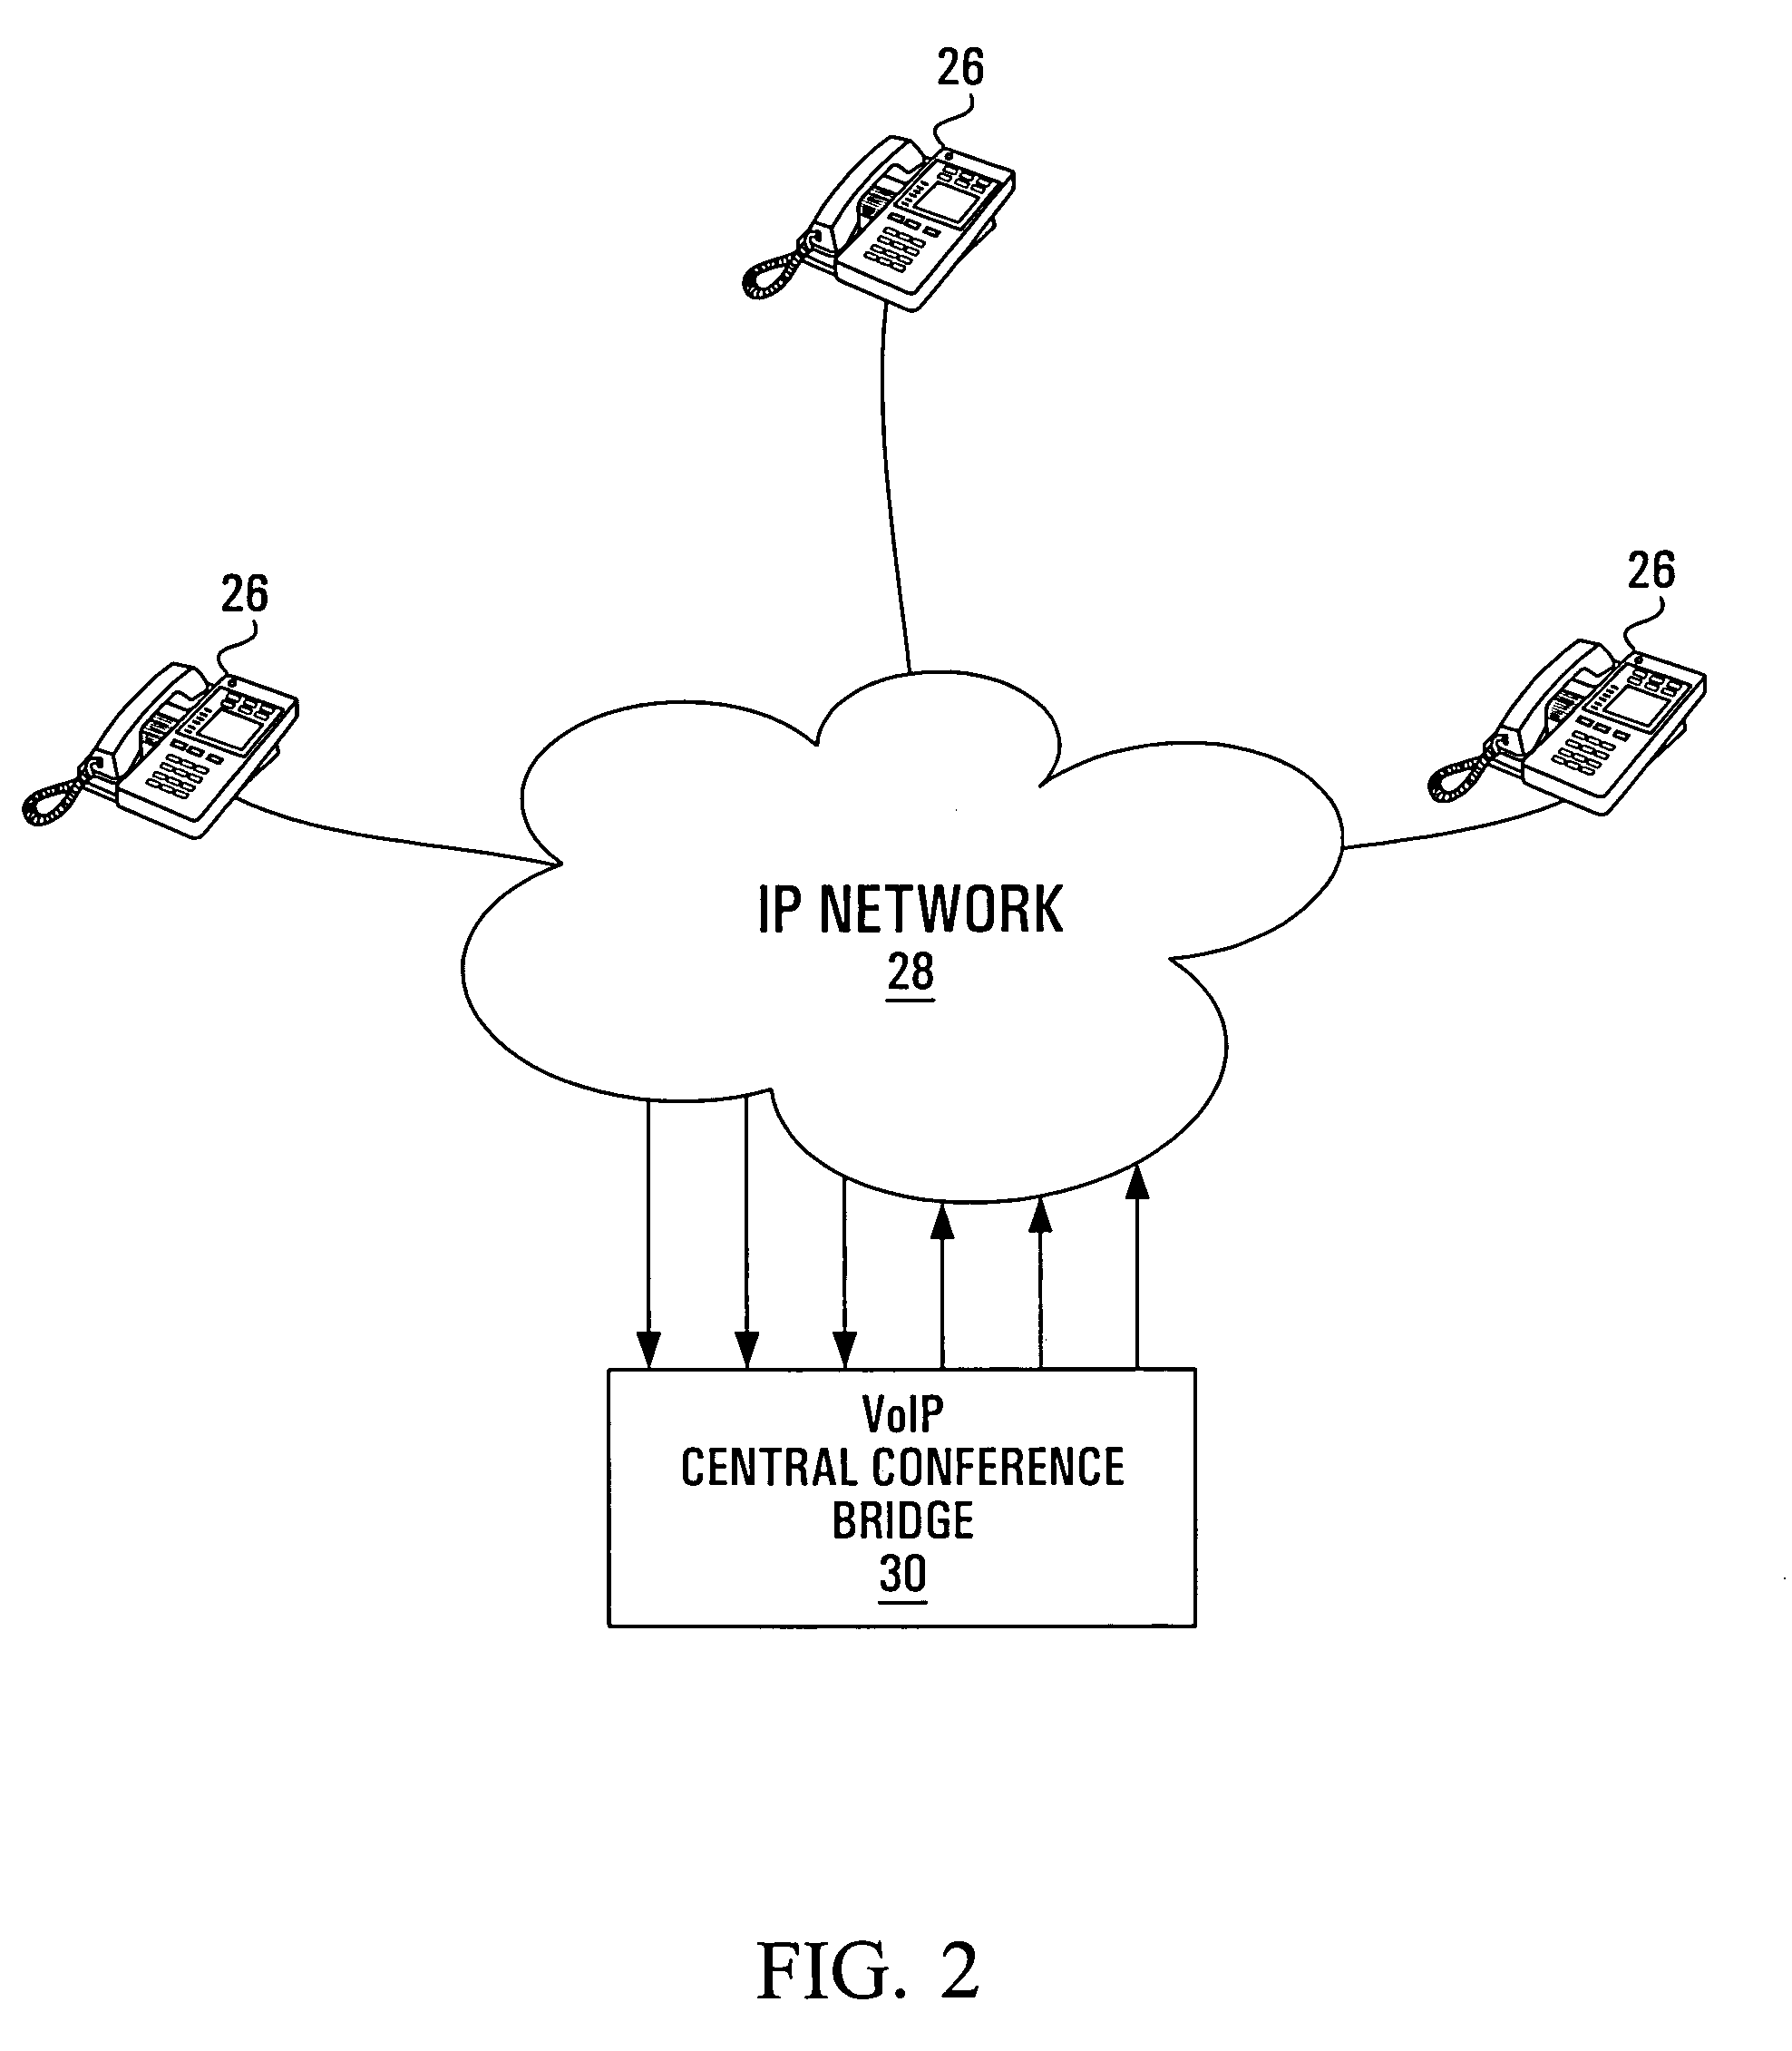 Apparatus and method for packet-based media communications